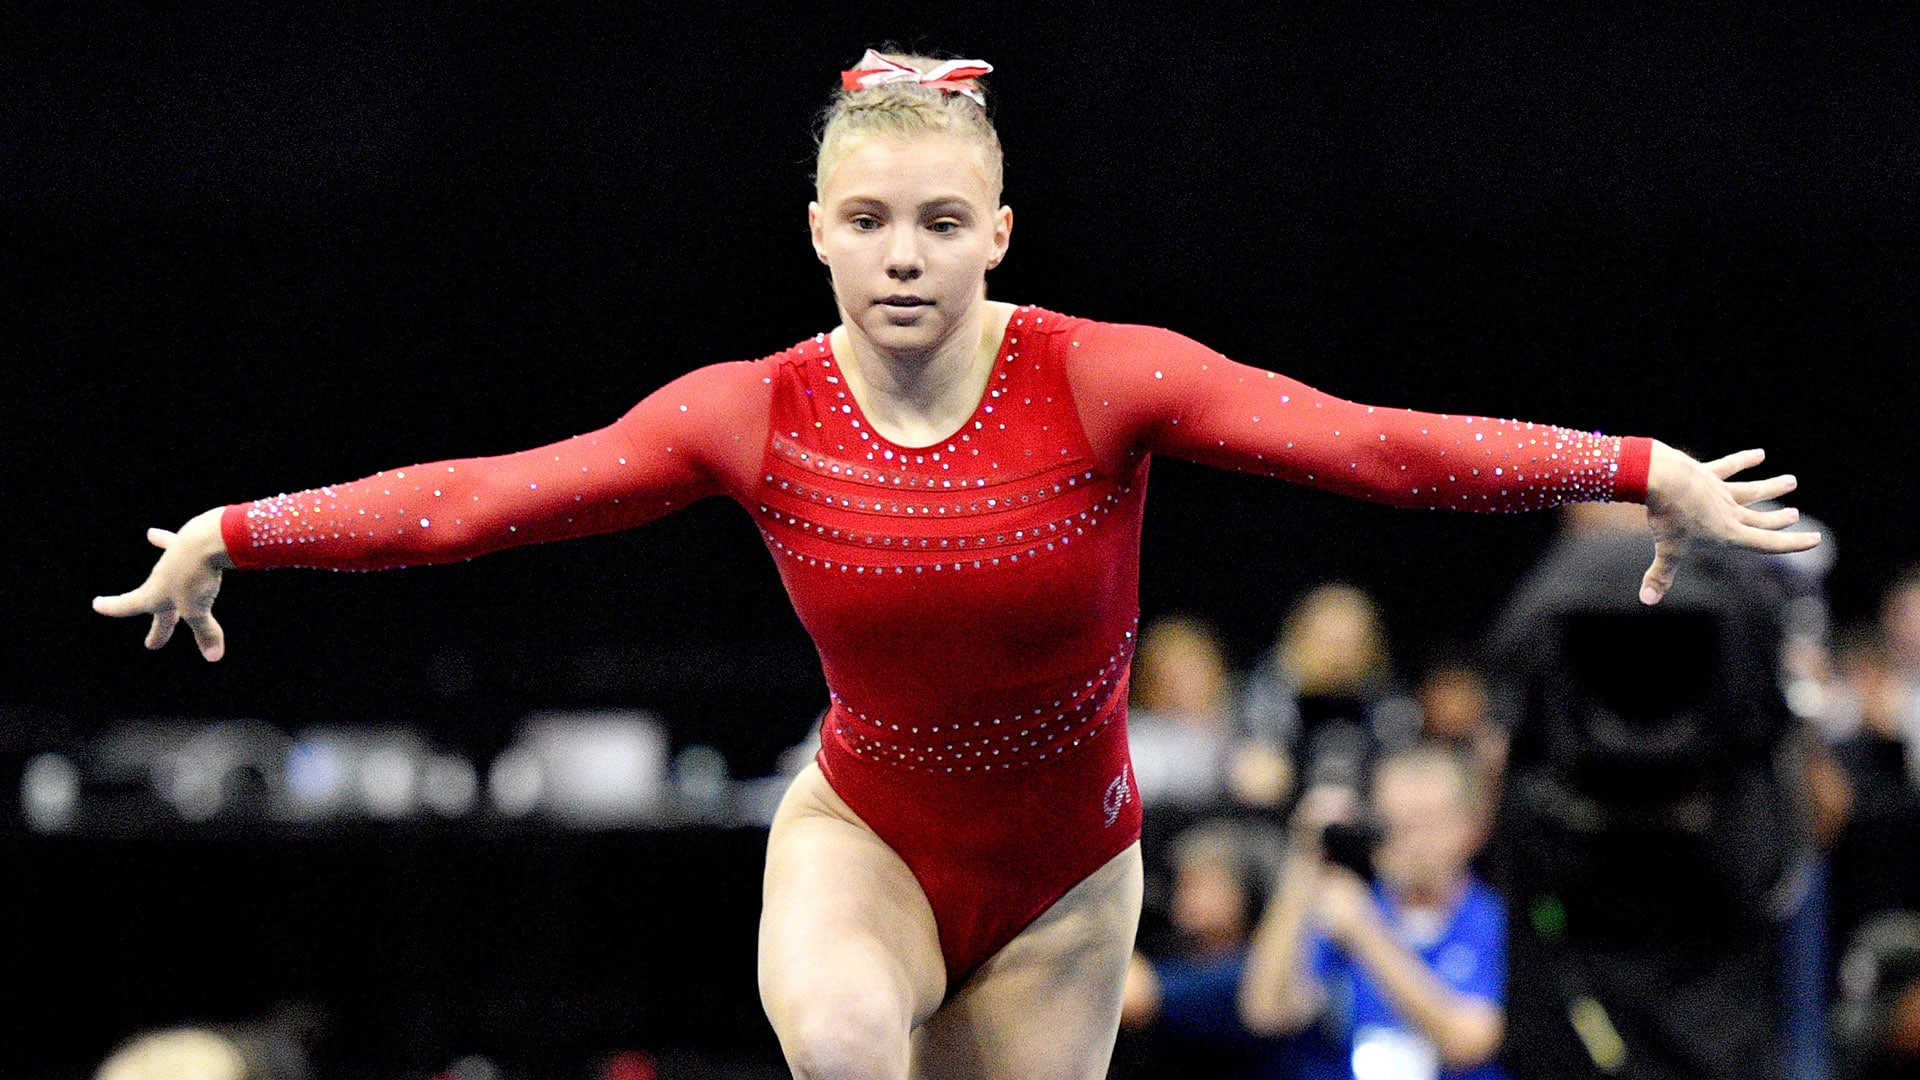 Gymnast Jade Carey says she will accept individual Olympic spot